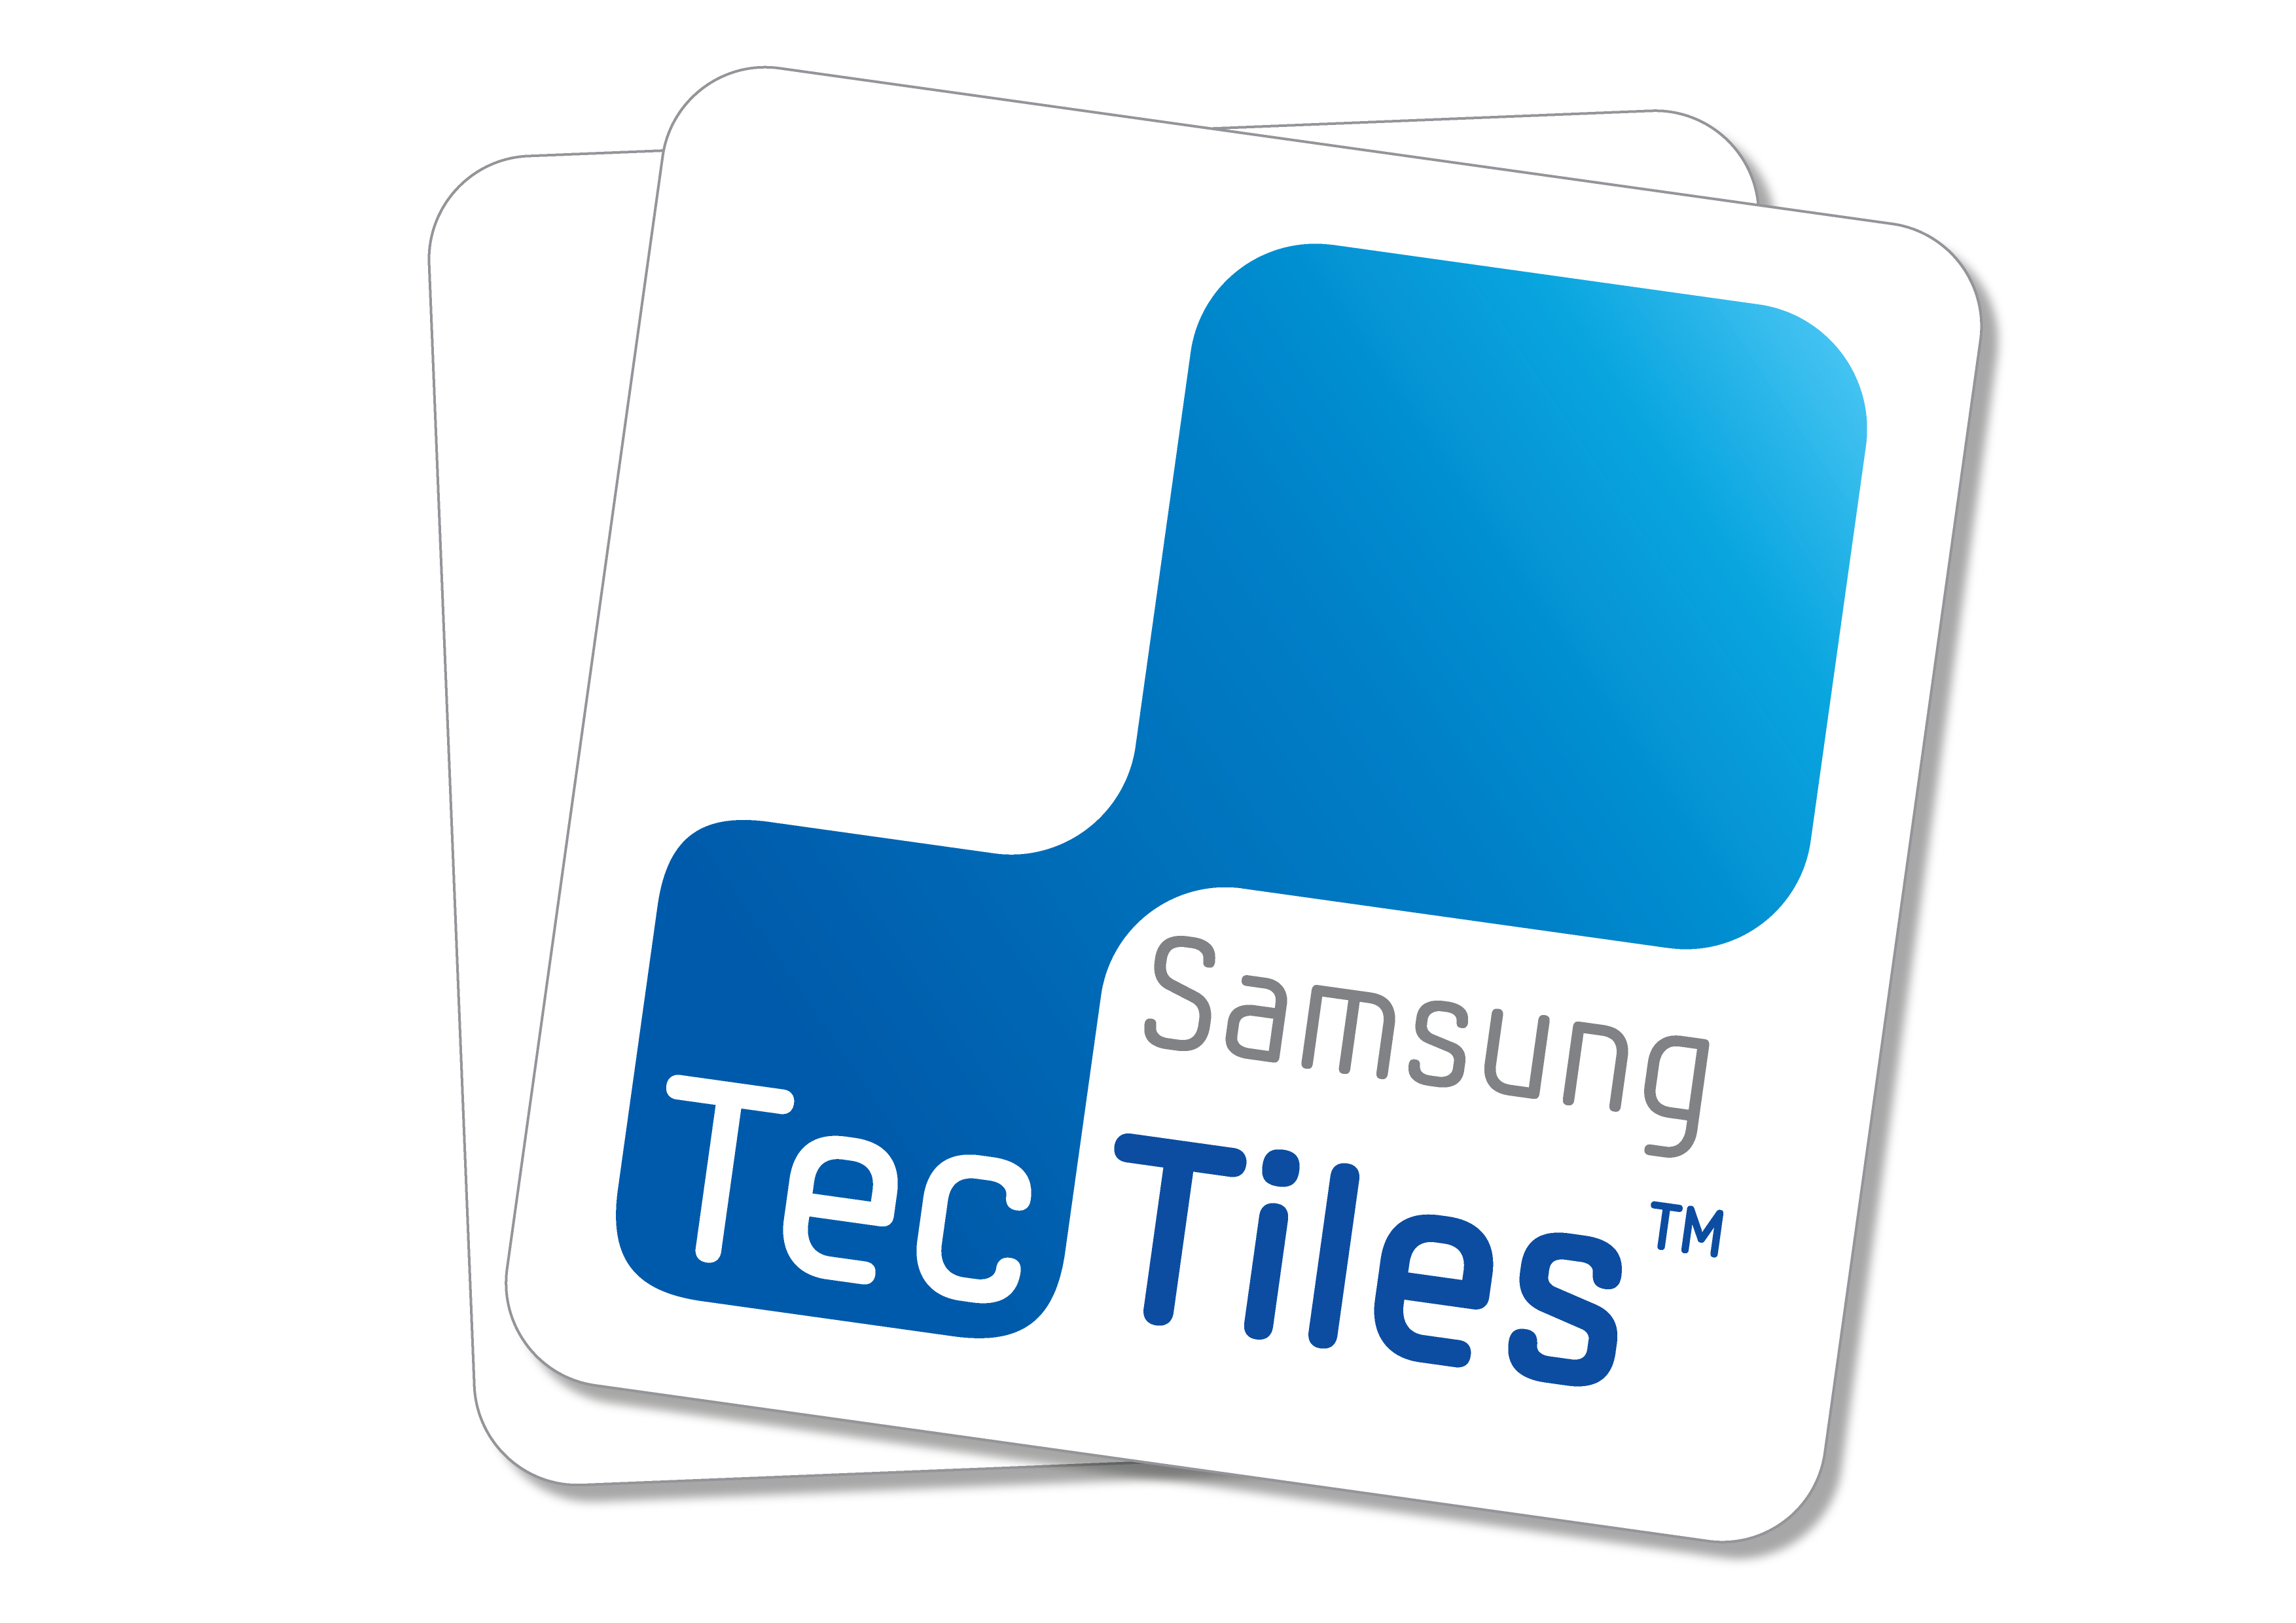 NFC tiles that can do your bidding